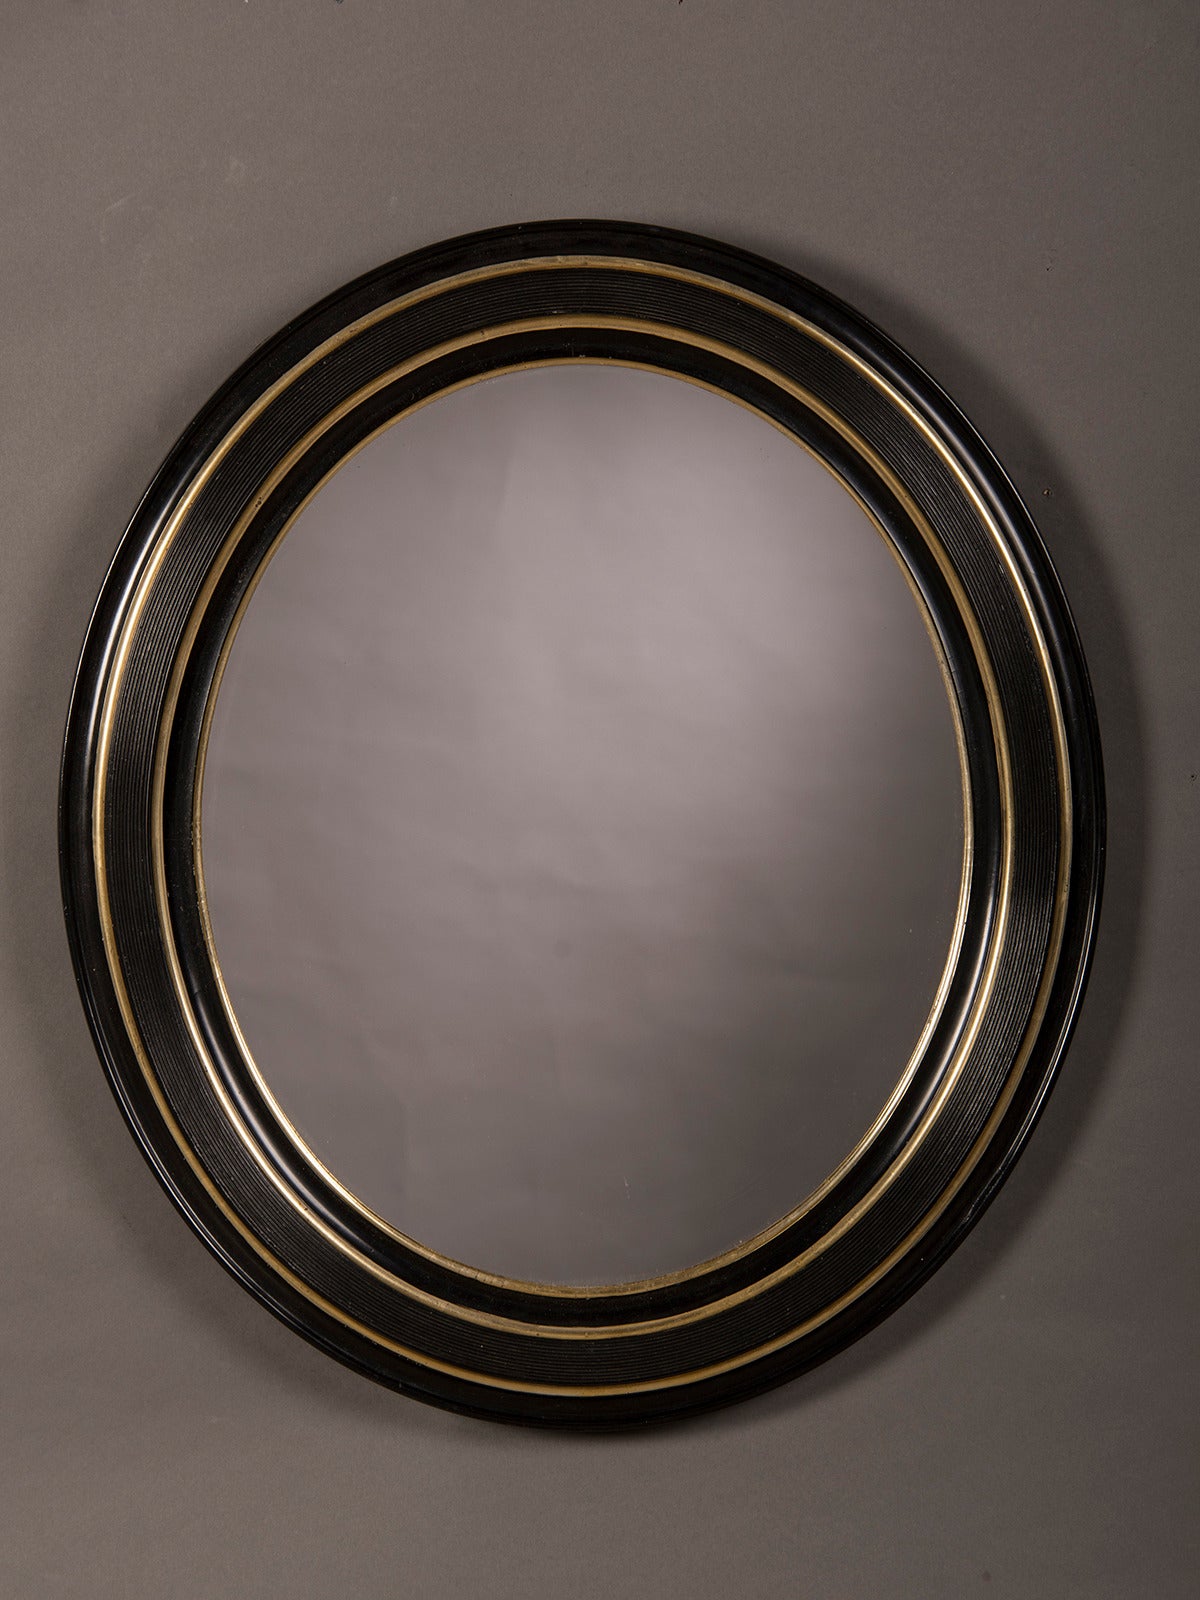 A handsome oval wooden frame lacquered in black with gold leaf highlights enclosing the original mirror glass from England c. 1890. Please notice the three alternating bands of black and gold with each having a different scale and reflective value.